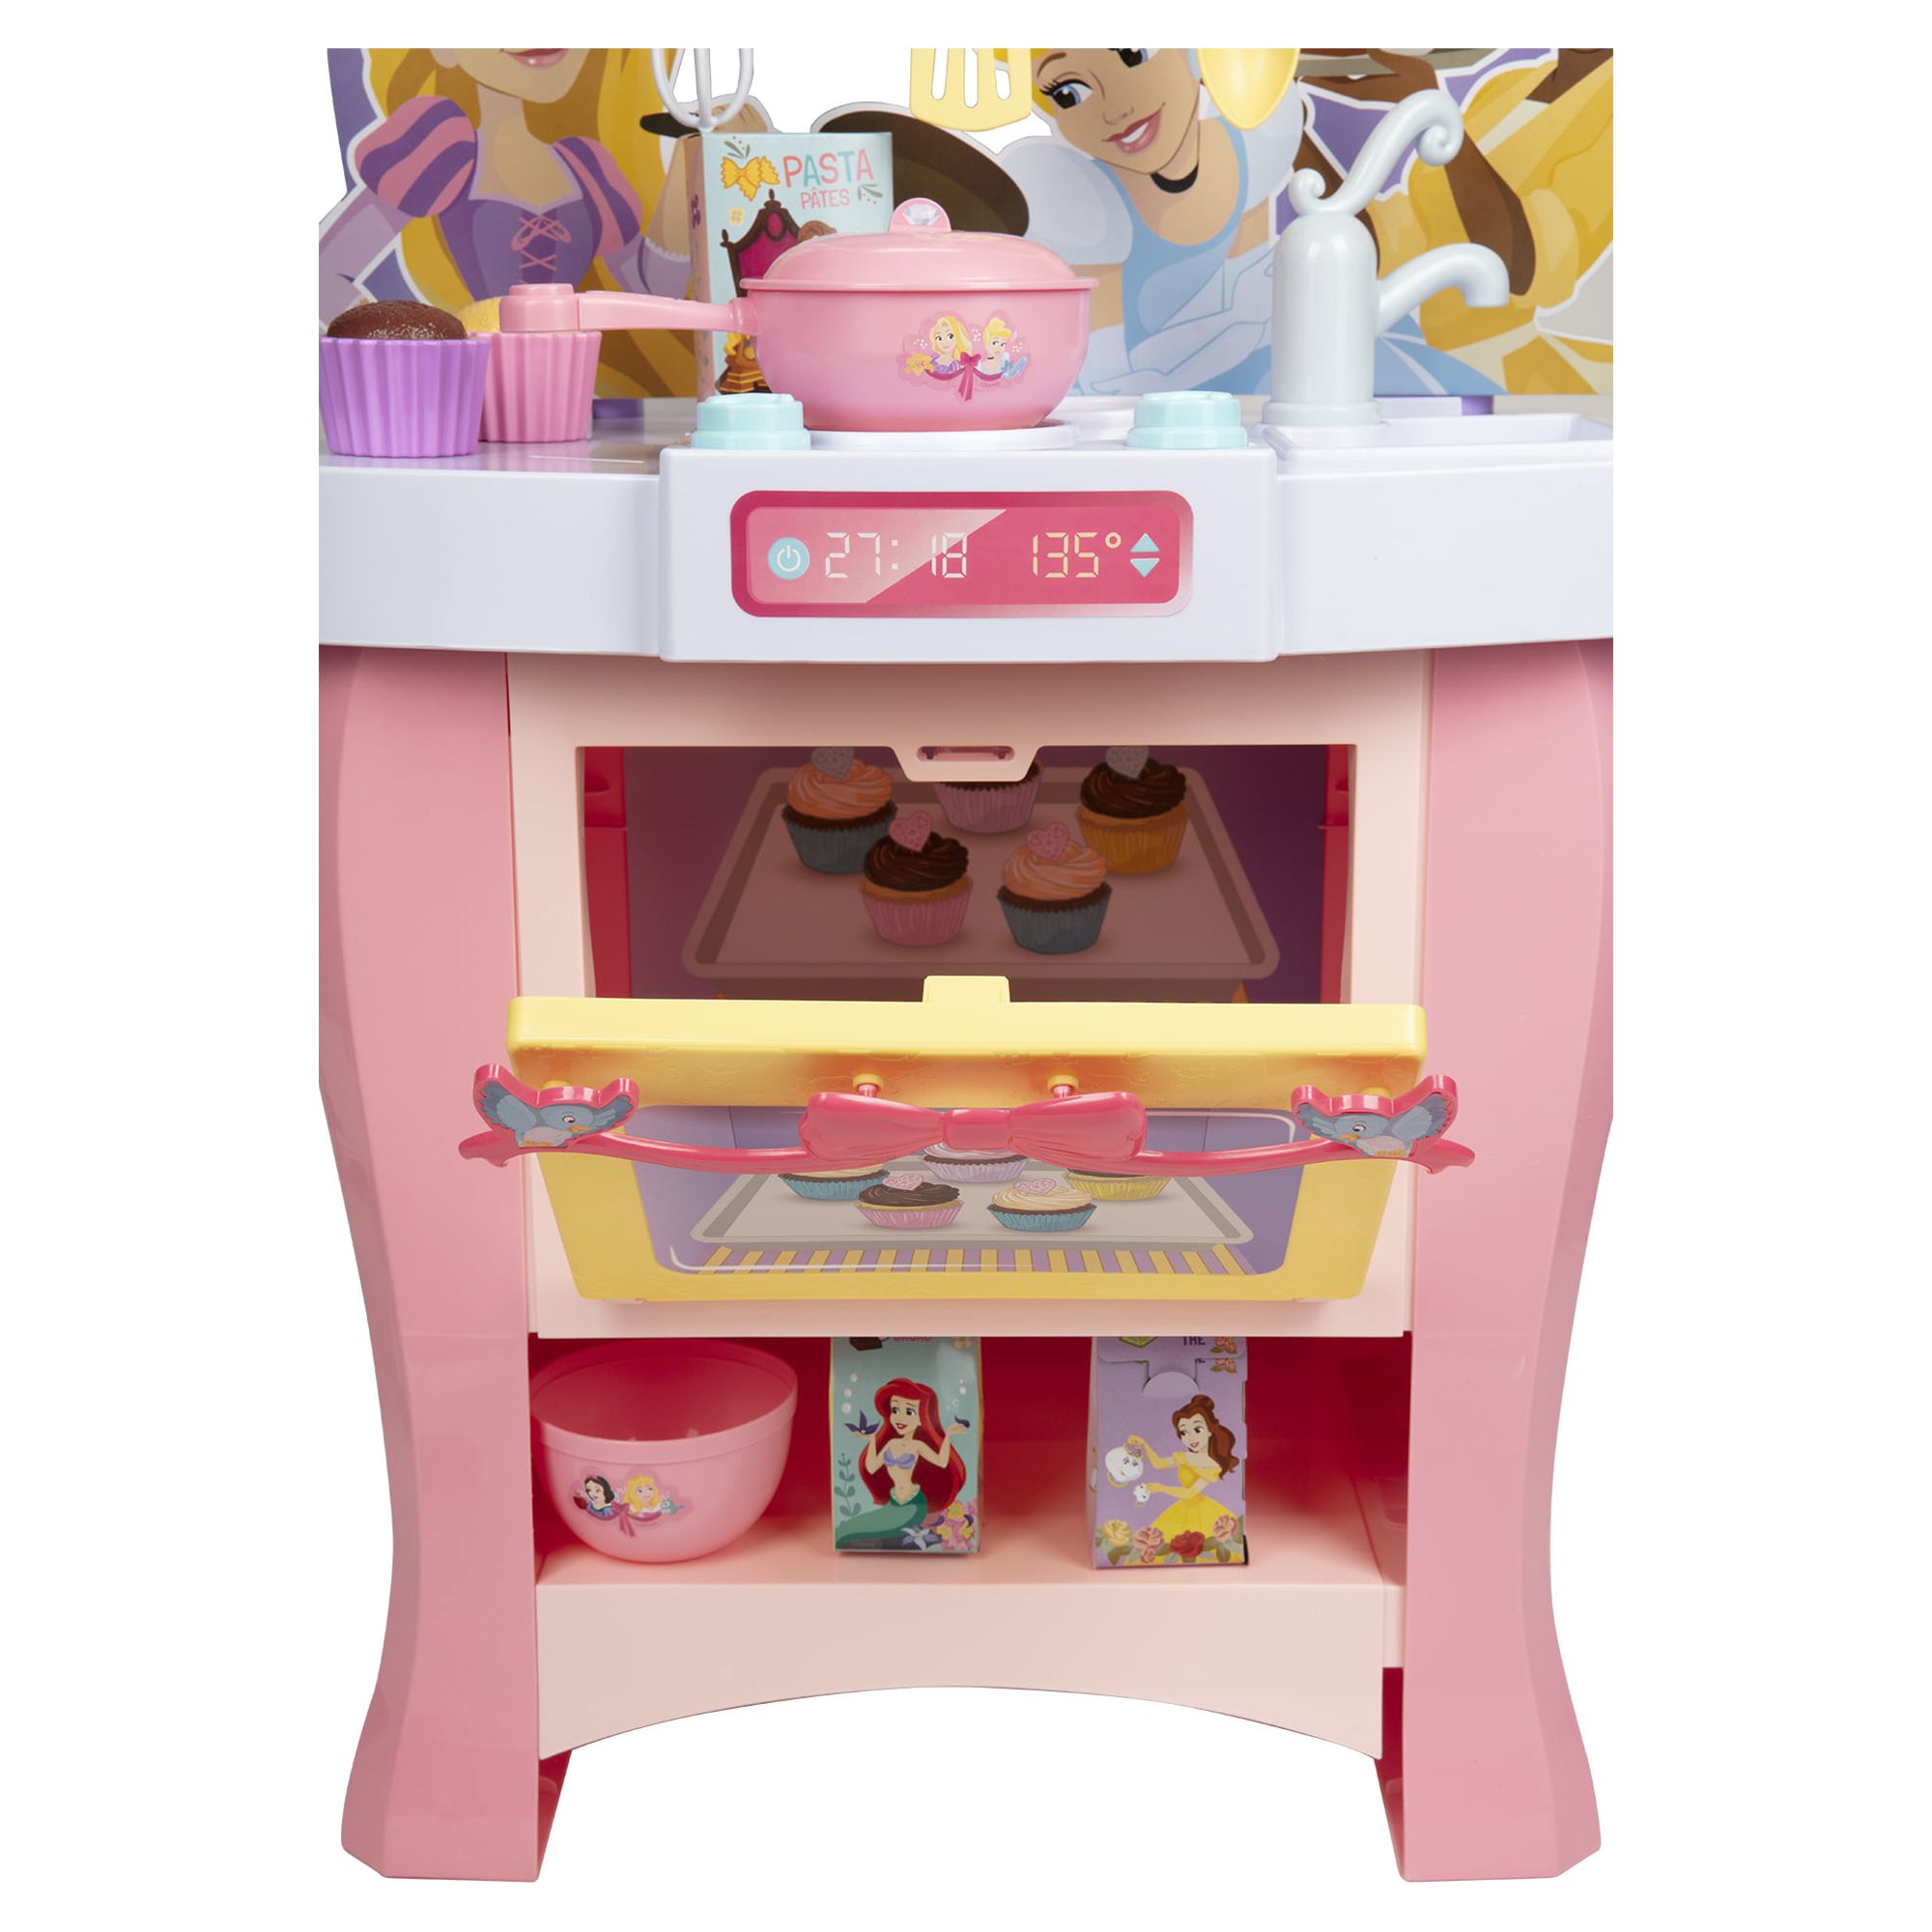 Disney Princess Play Kitchen Includes 20 Accessories, over 3 Feet Tall - image 5 of 6